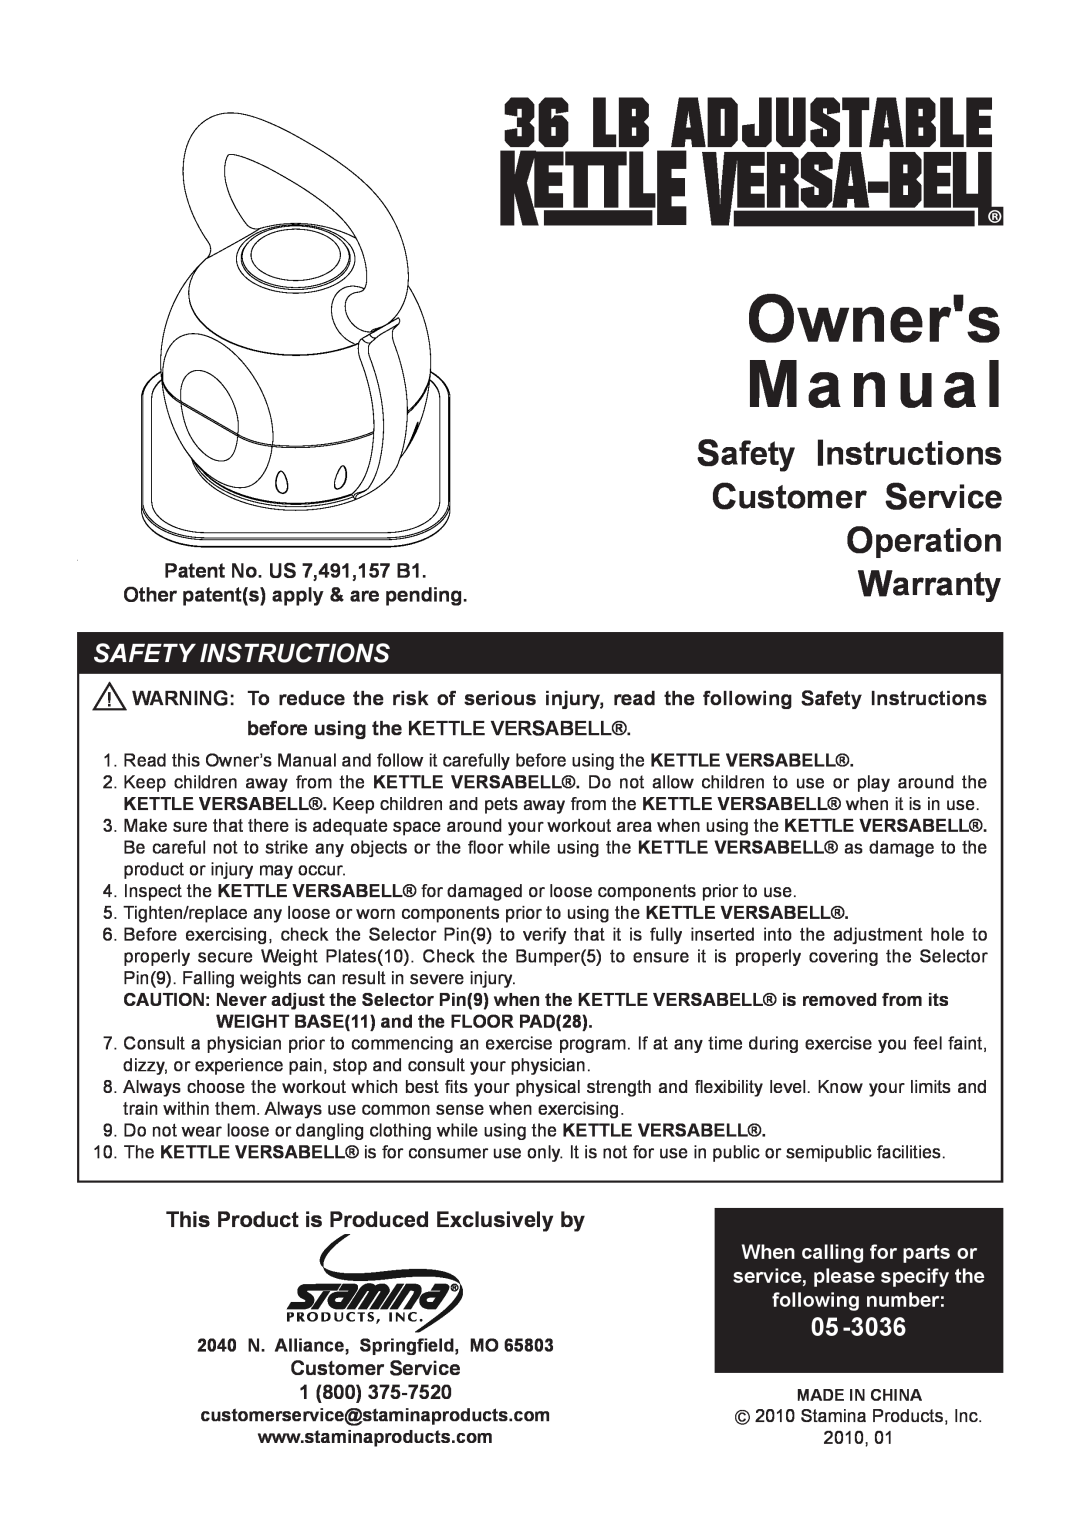 Stamina Products May-36 owner manual Safety Instructions, This Product is Produced Exclusively by, Stamina Products, Inc 